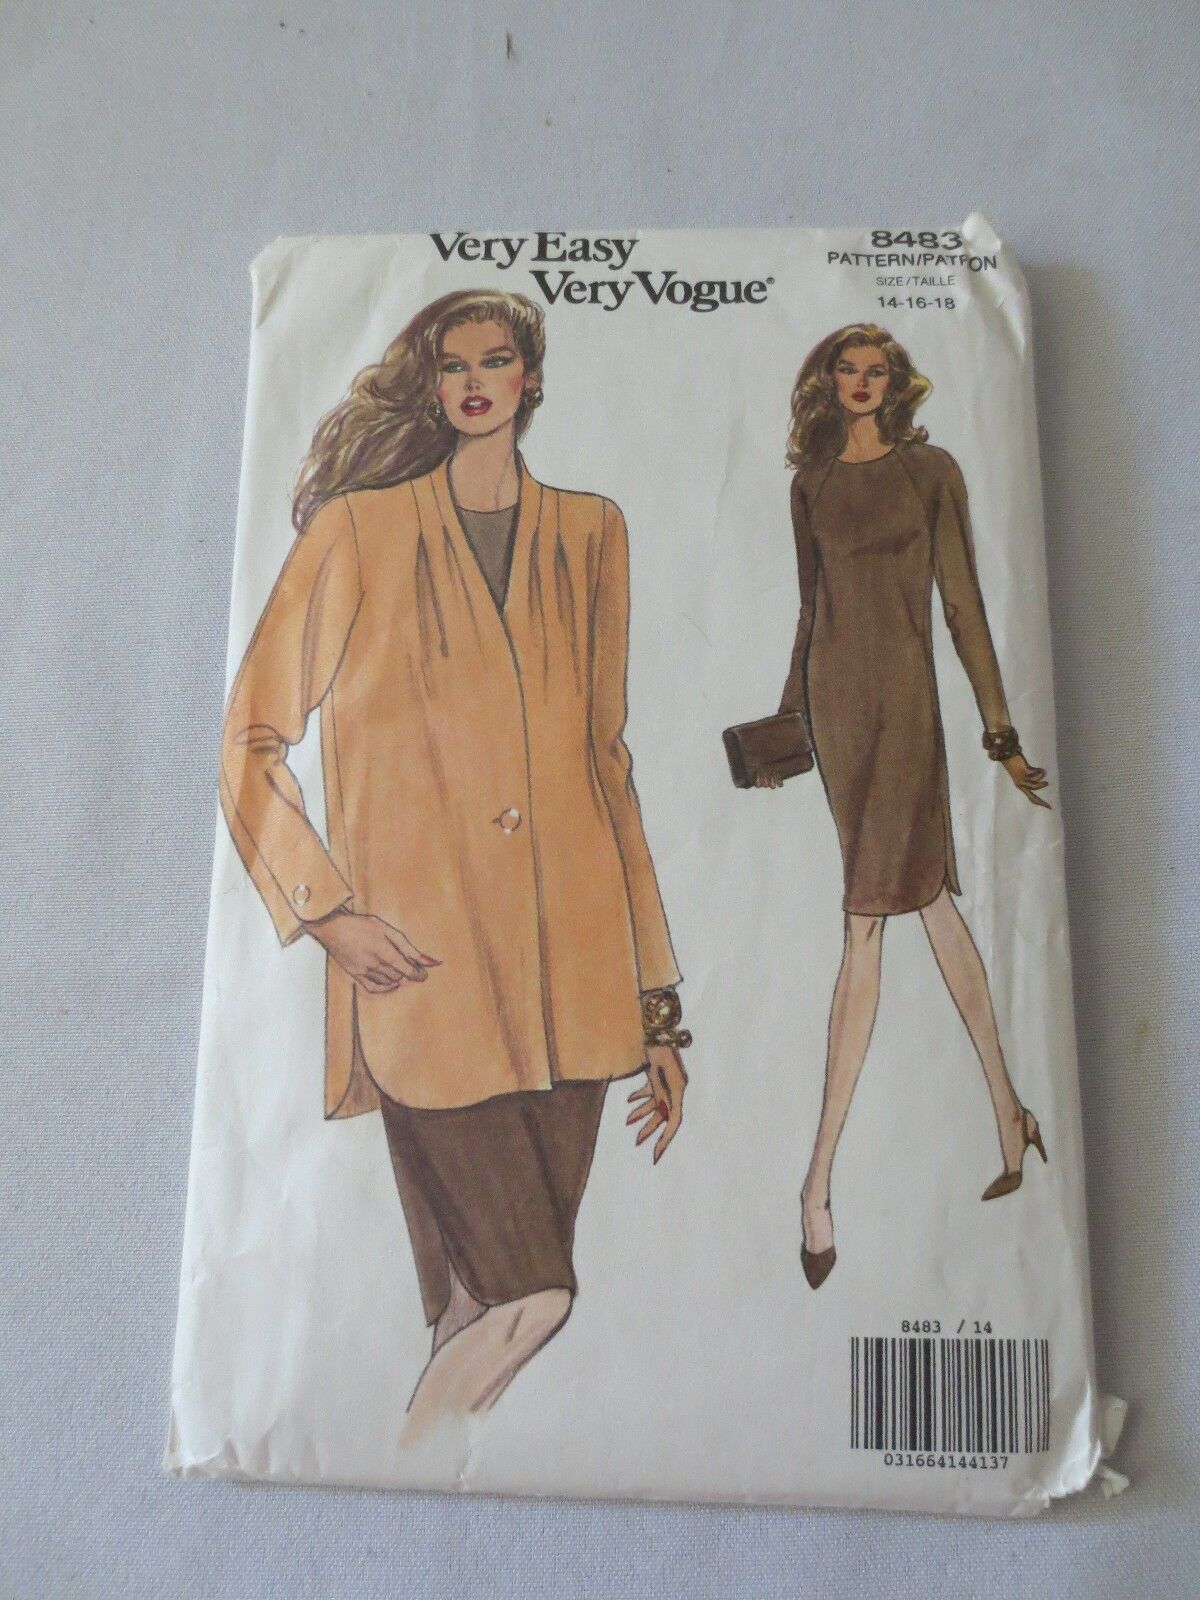 Primary image for Vogue Pattern 8483 Jacket and dress  Size 14 16 18 uncut